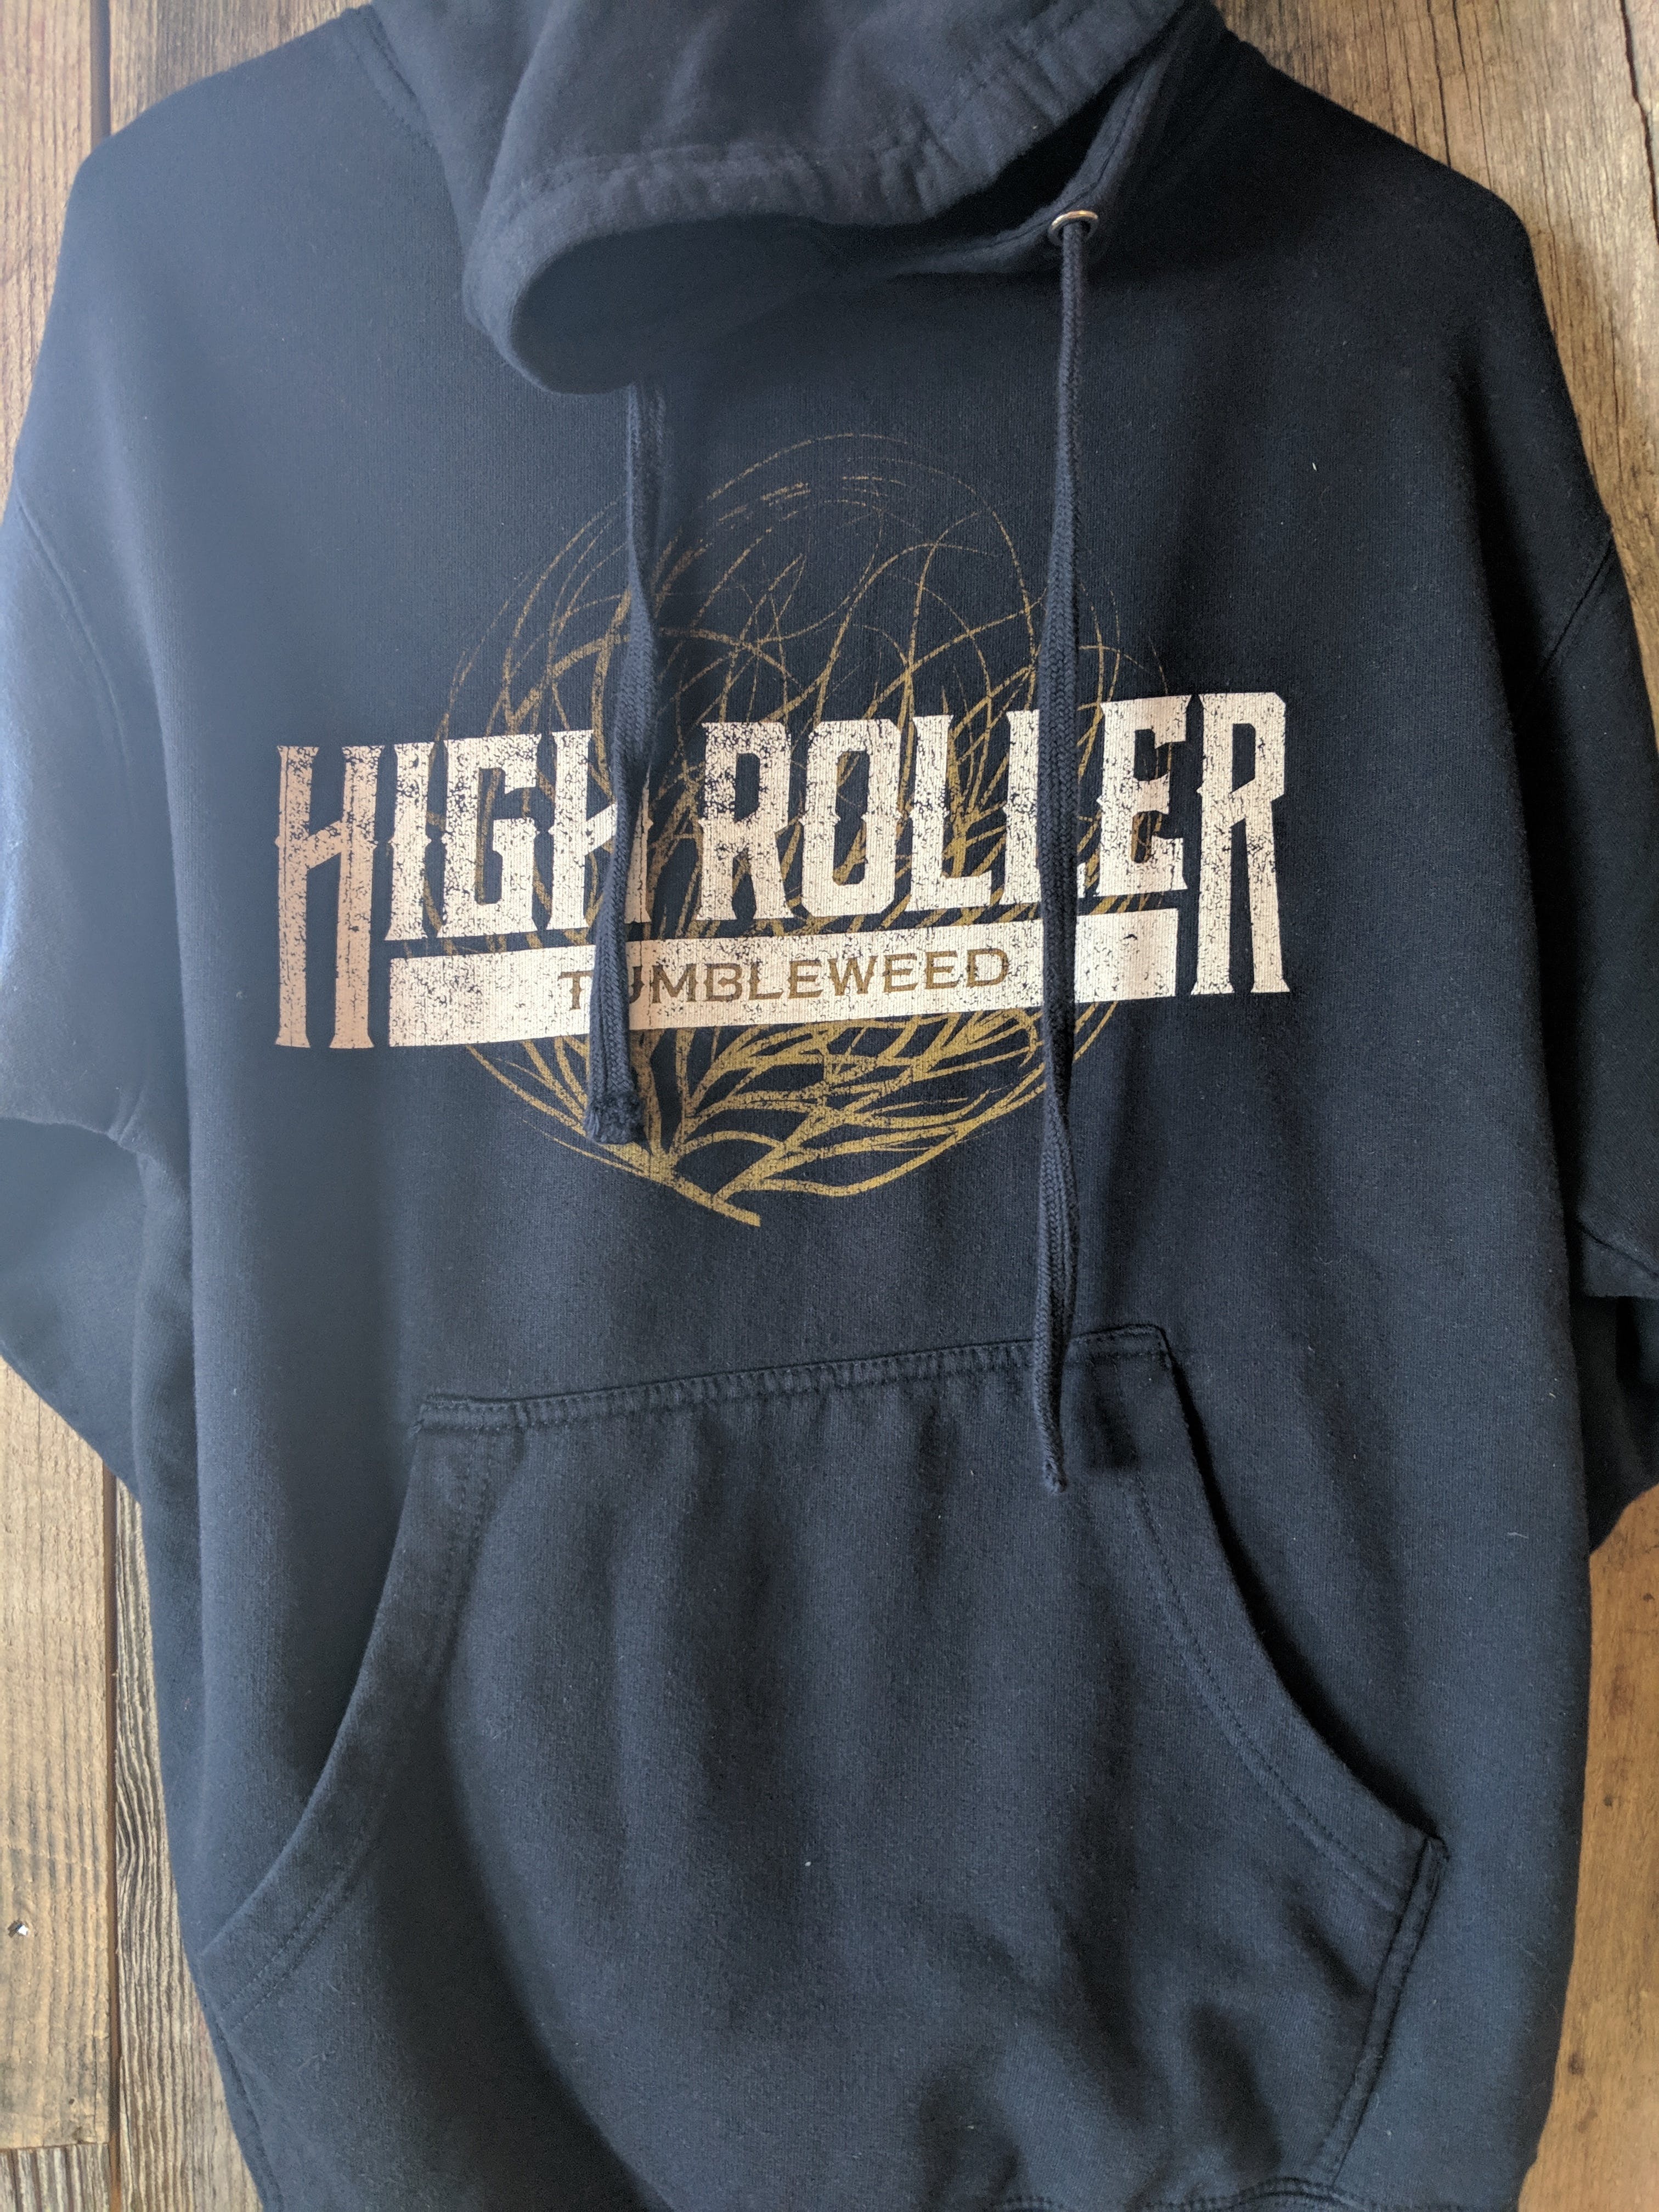 gear-high-roller-pull-over